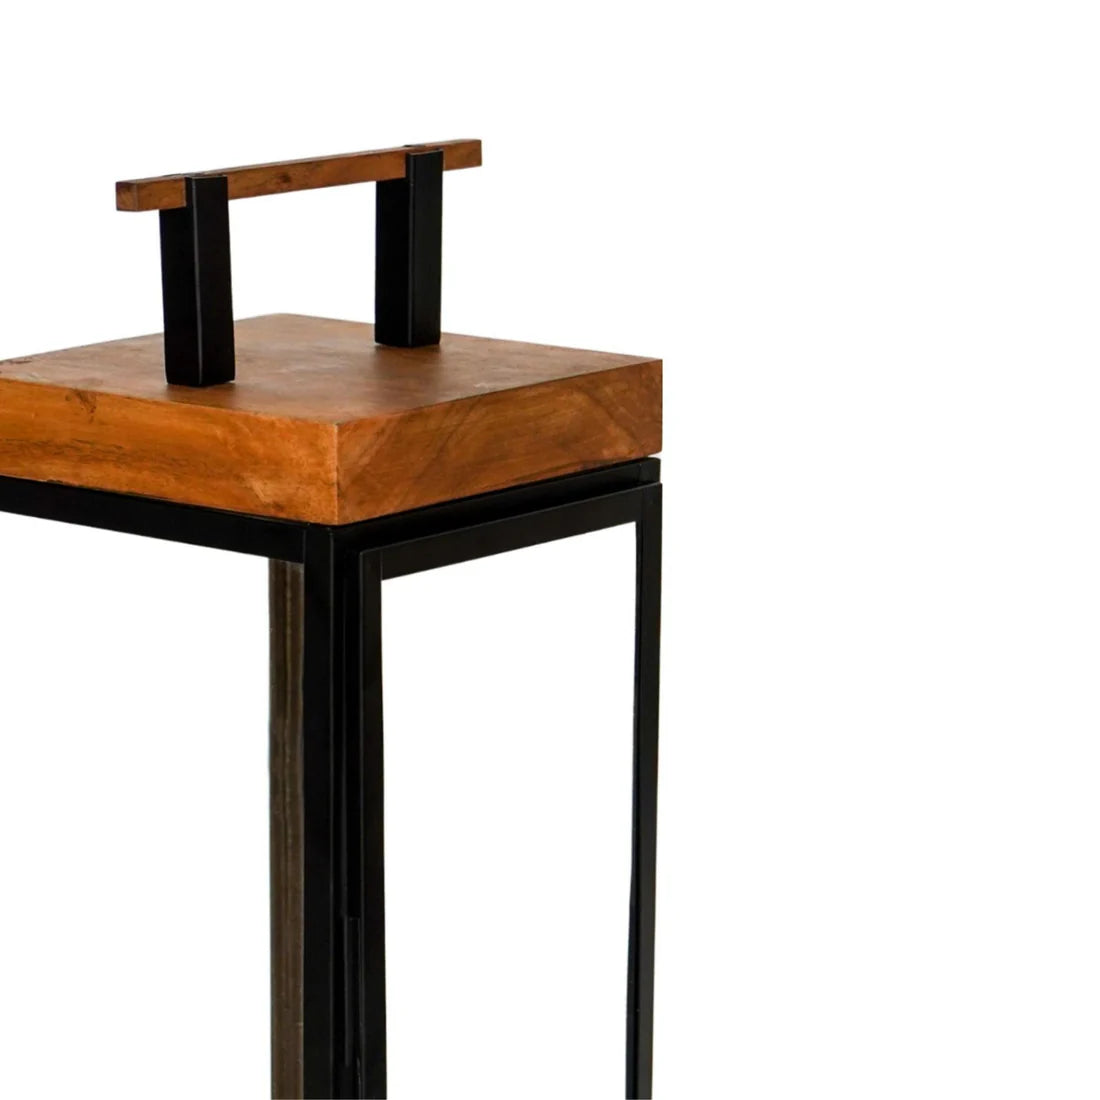 Grace Tall Lantern in Acacia Wood and Black